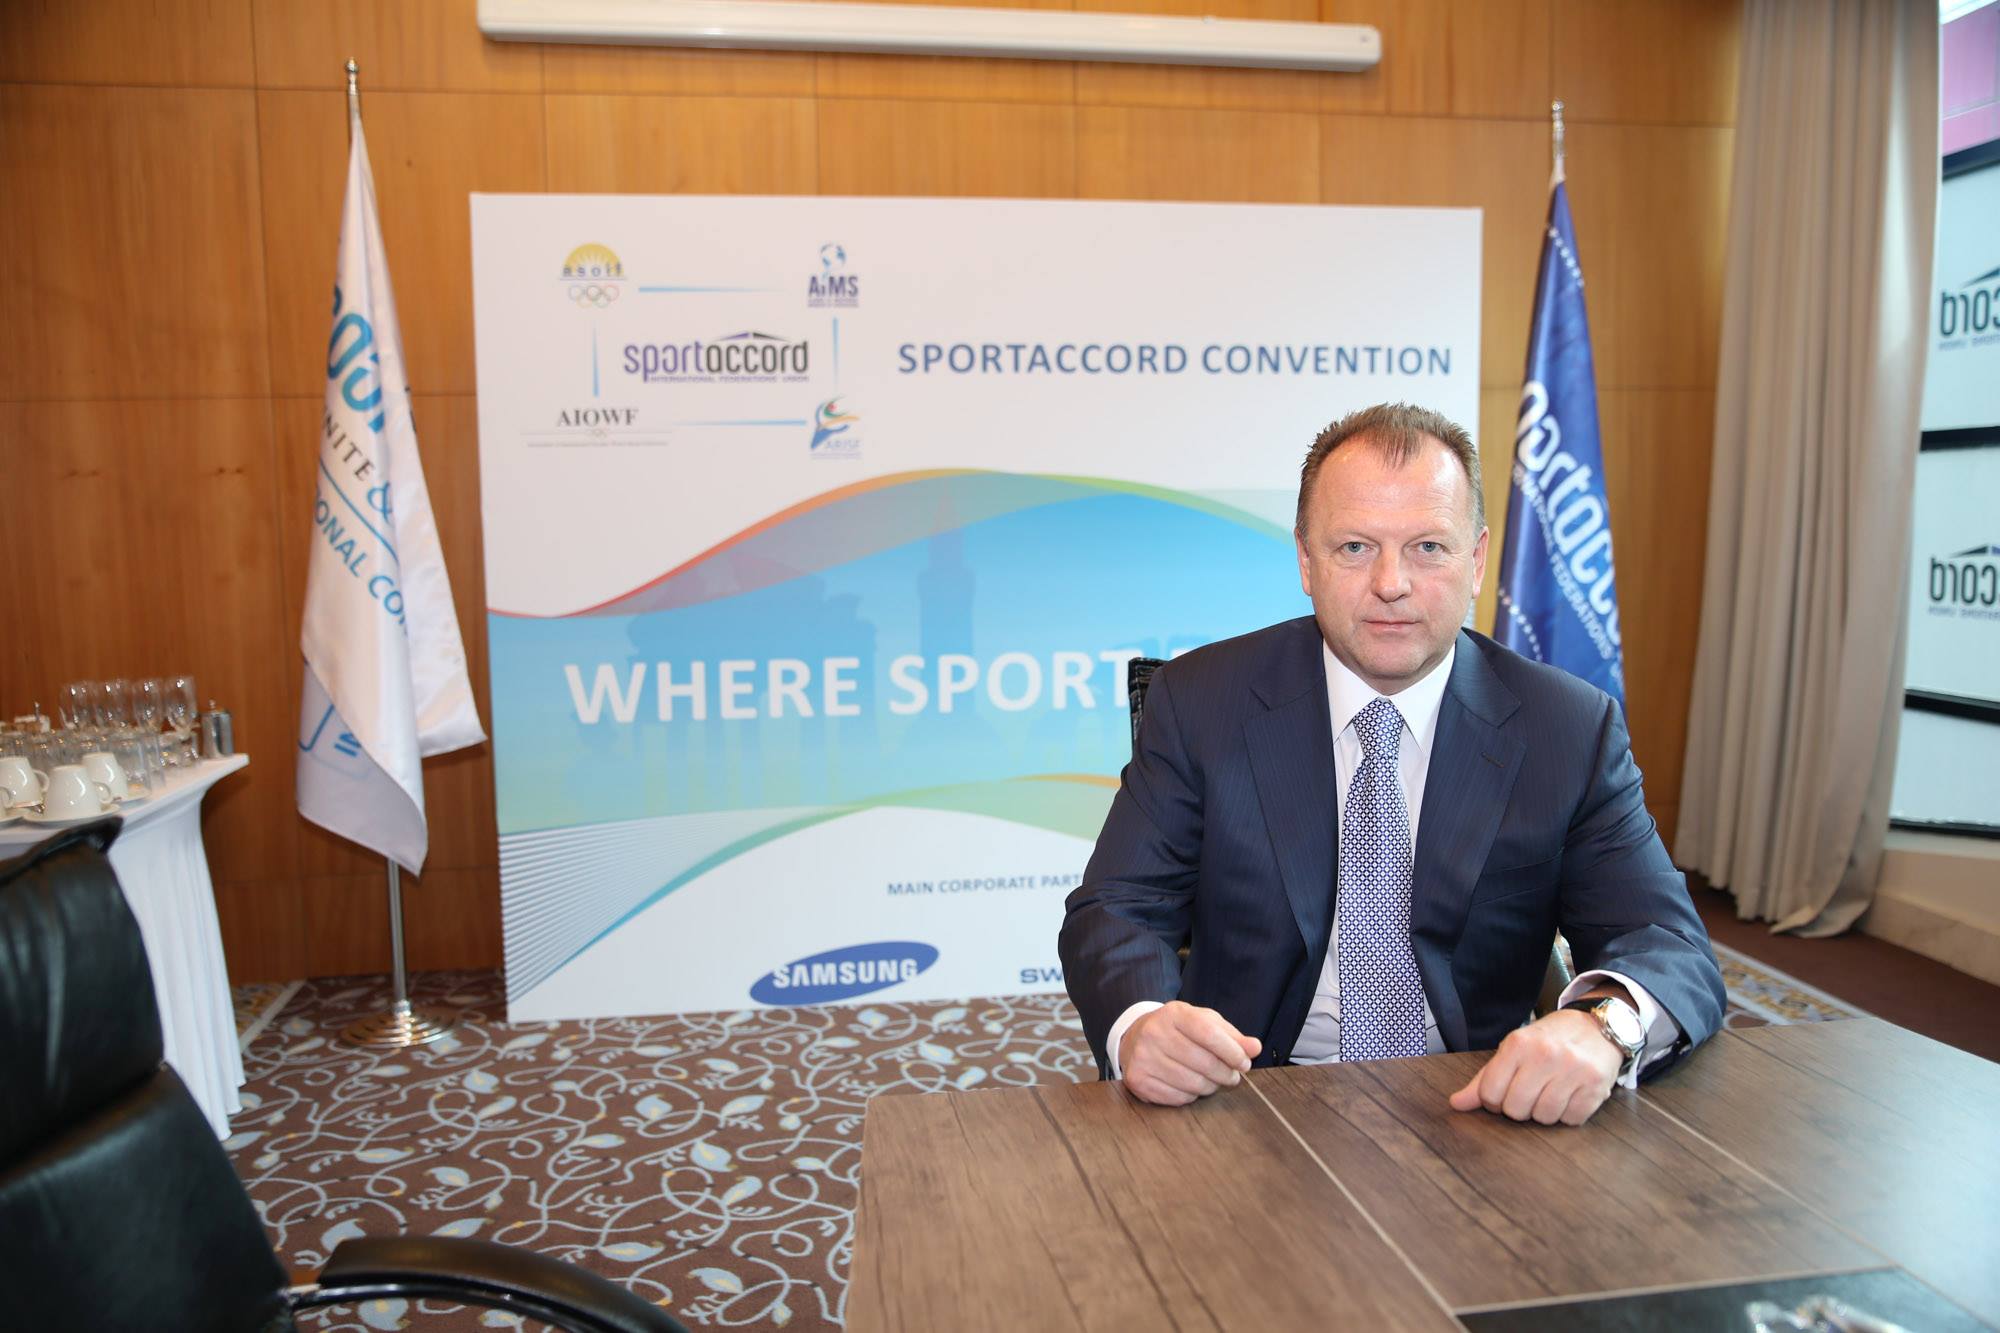 Marius Vizer is set to launch a new strategy for the 2015 SportAccord International Convention, he has revealed ©SportAccord Convention